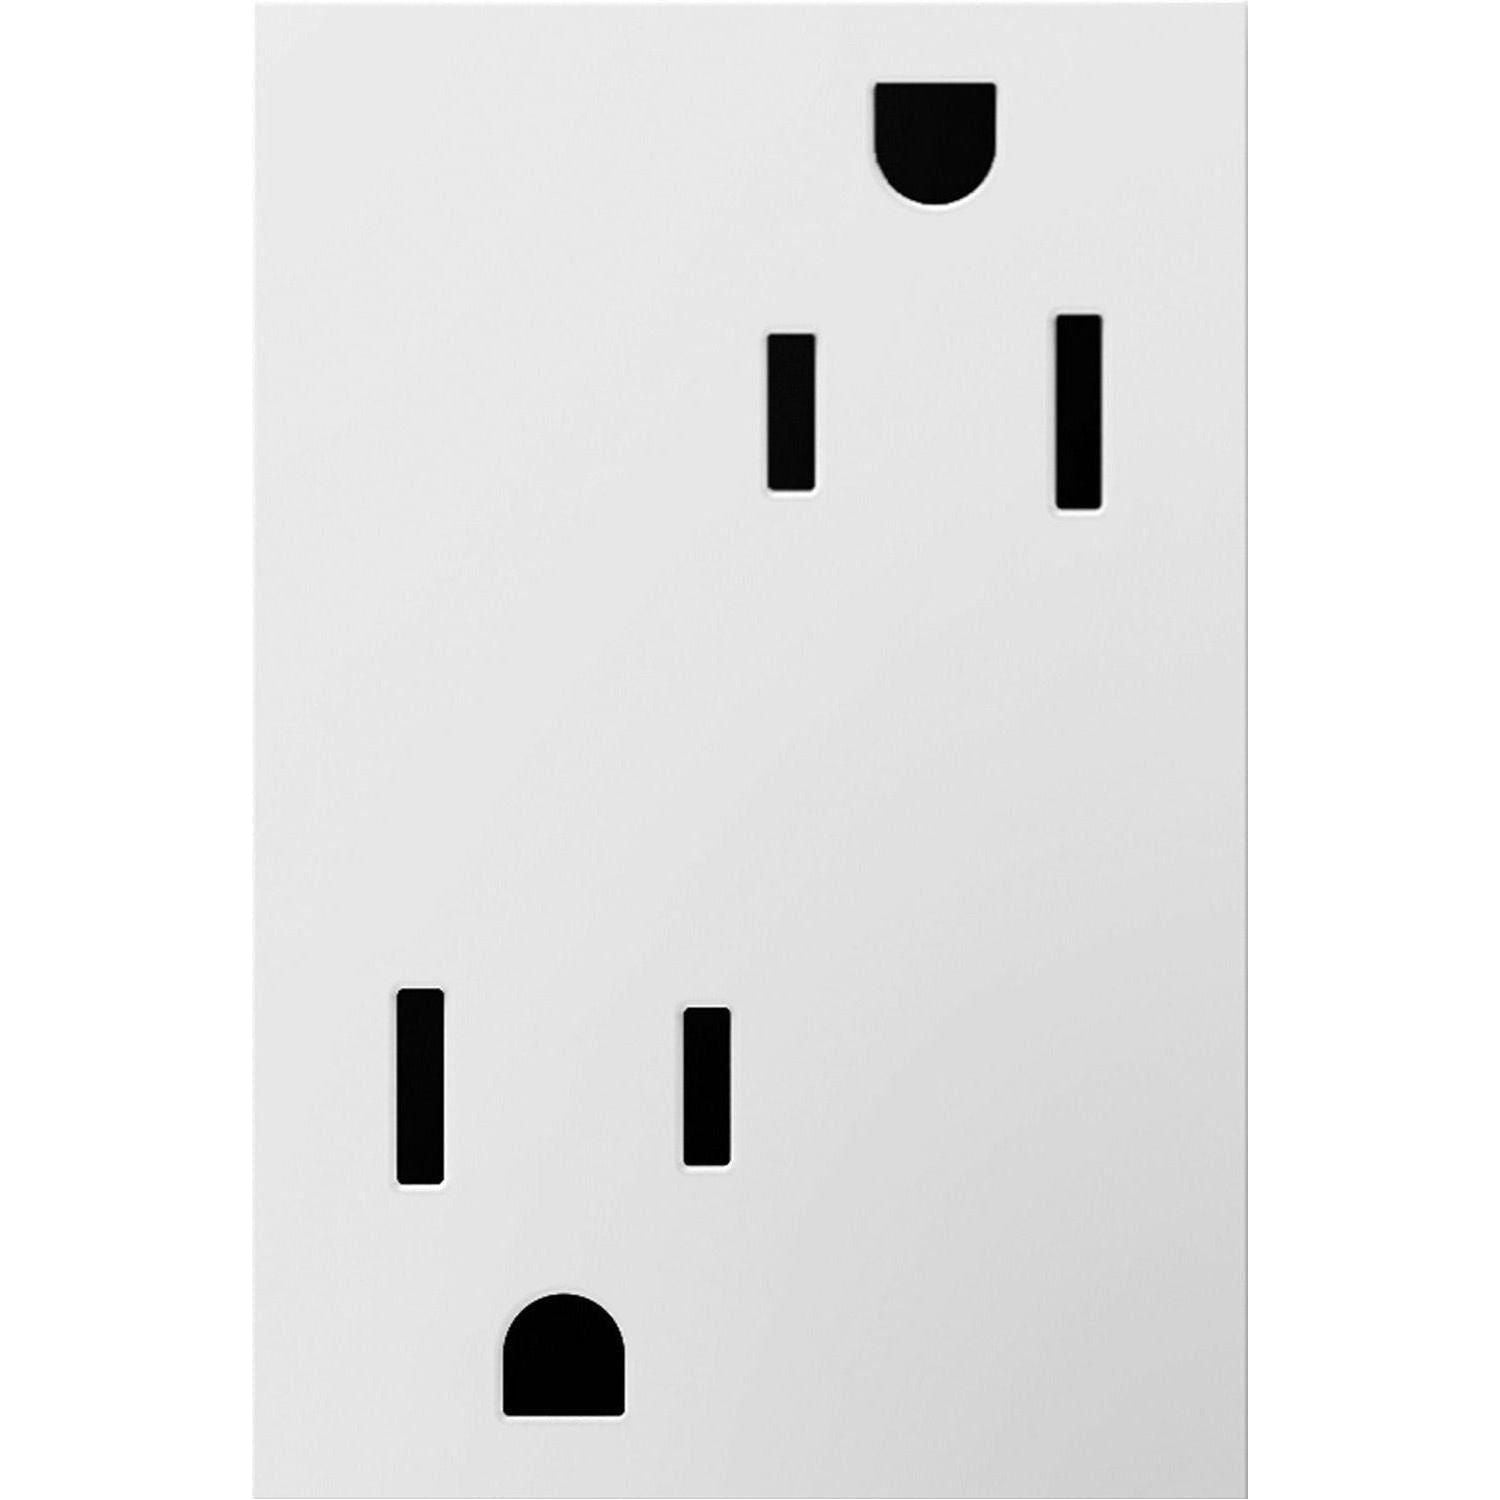 Legrand - 15A Tamper-Resistant Plus-Size Outlet - Lights Canada